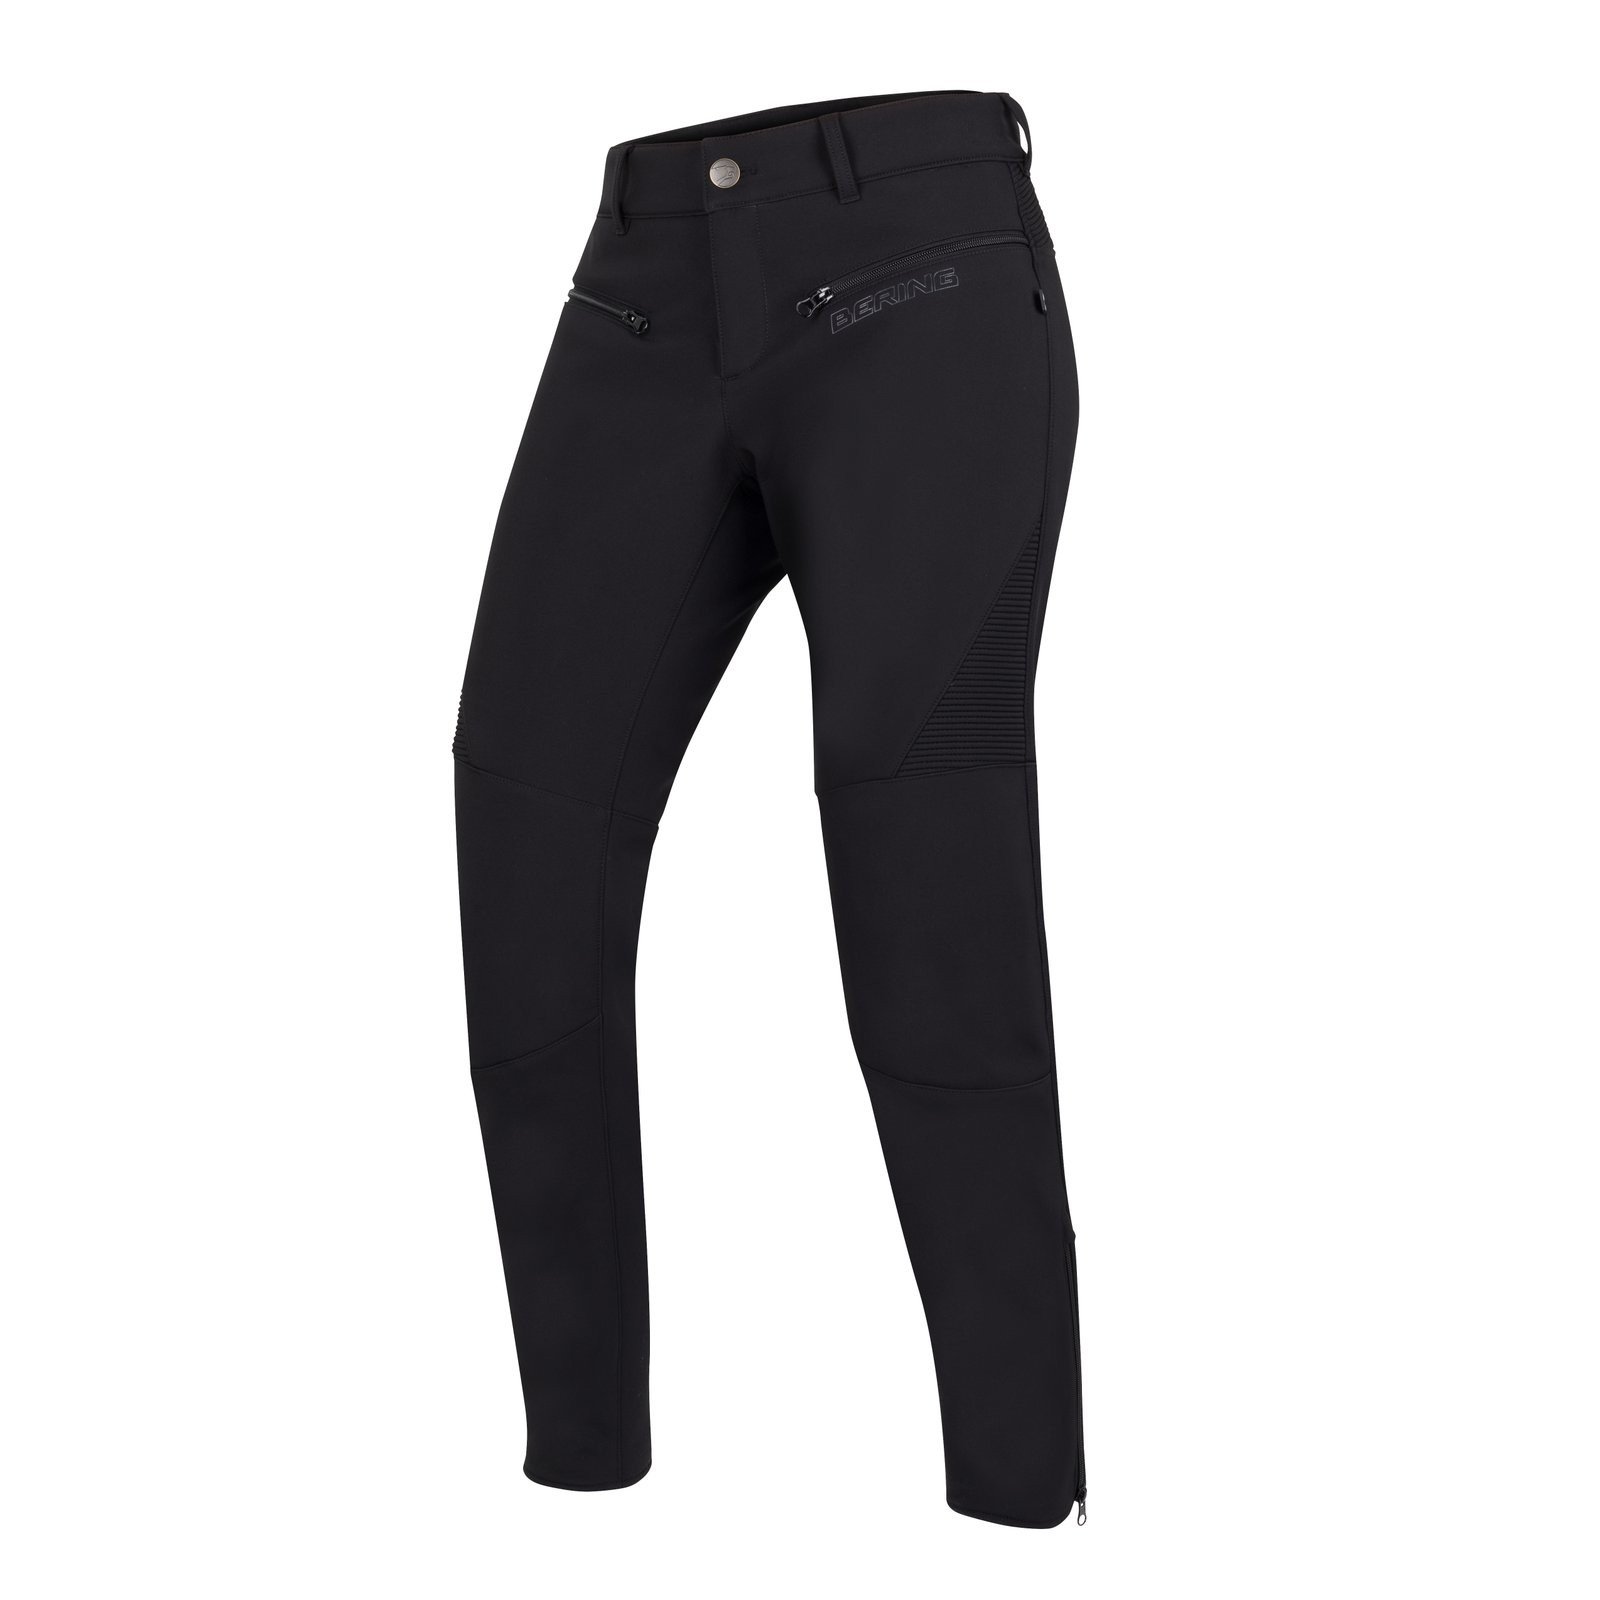 Image of Bering Lady Alkor Trousers Black Size T1 ID 3660815150825